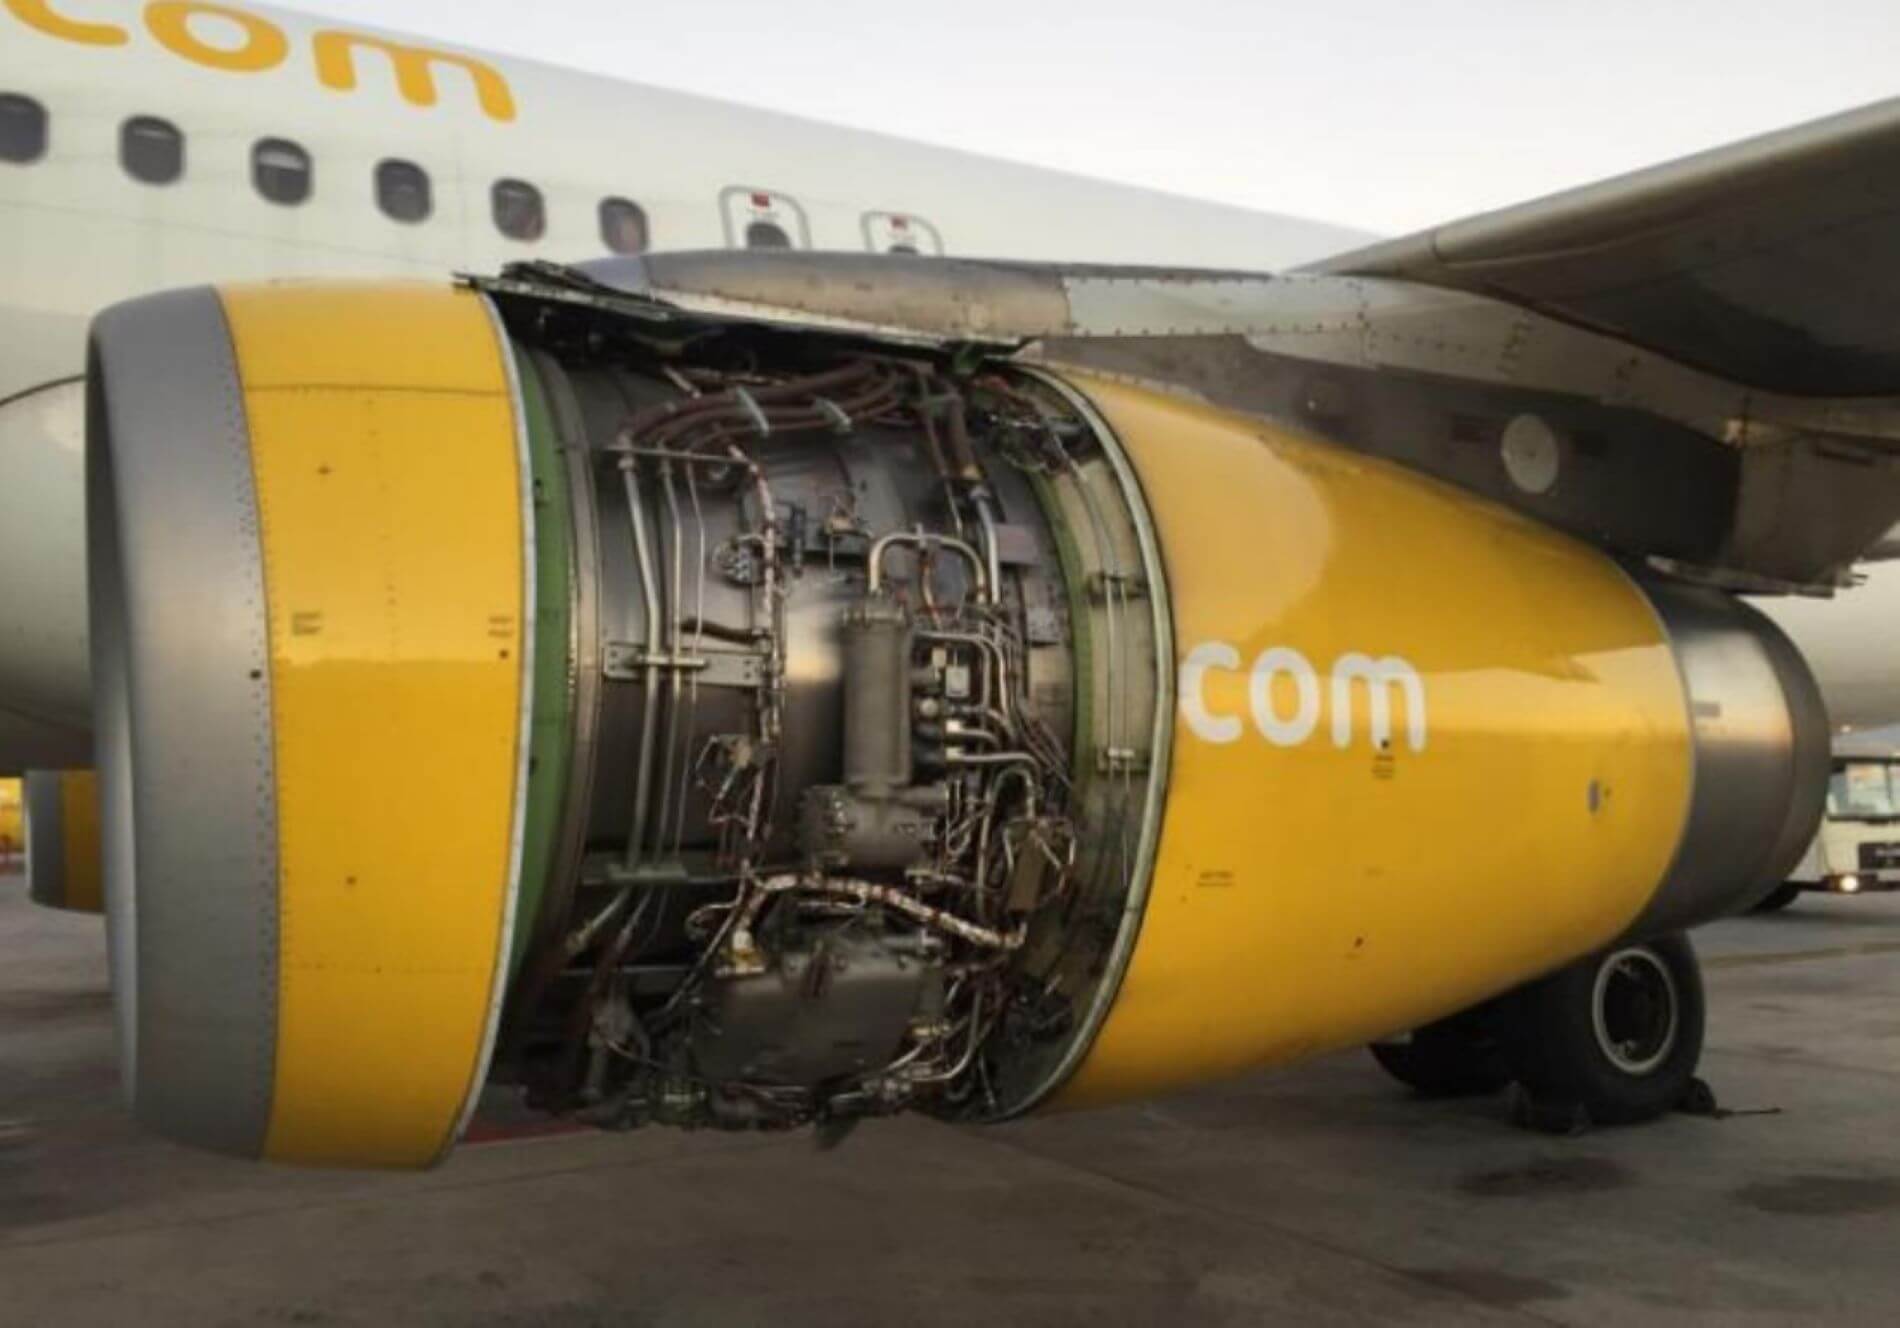 Airbus A320 without engine cowling AeroTime News